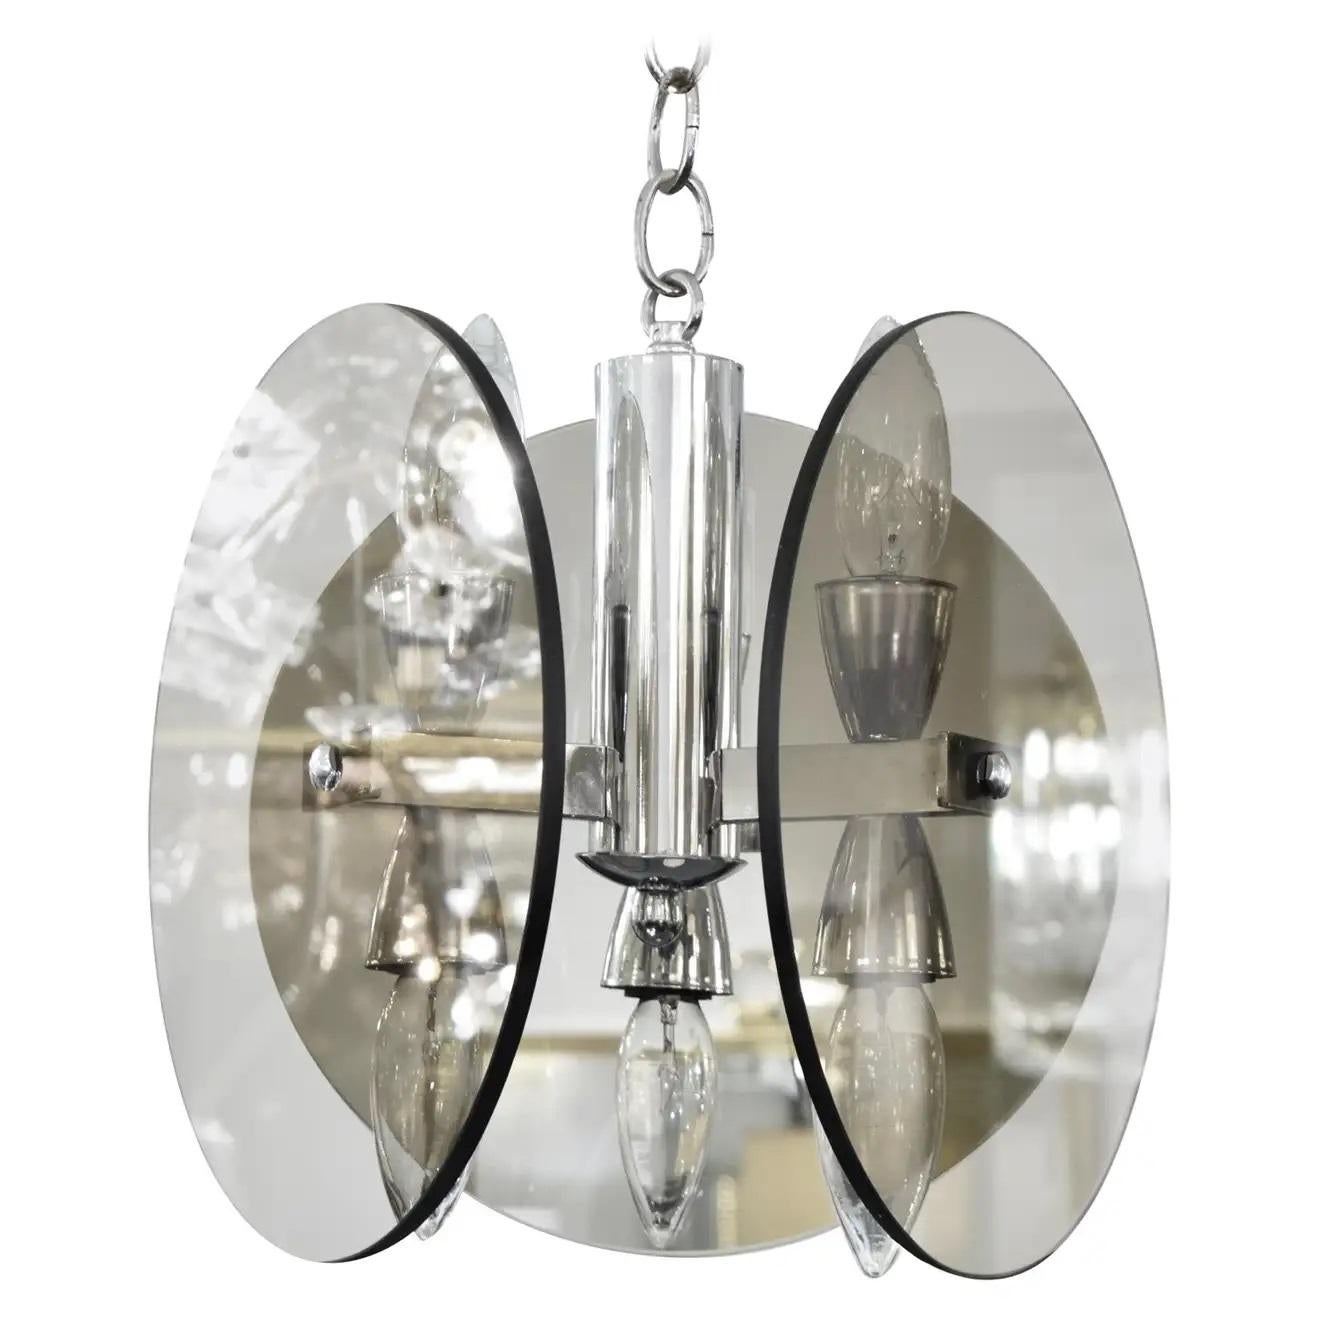 A smoked glass six bulb chandelier in the style of Fontana Arte, with three glass disks, each with a diameter of 10